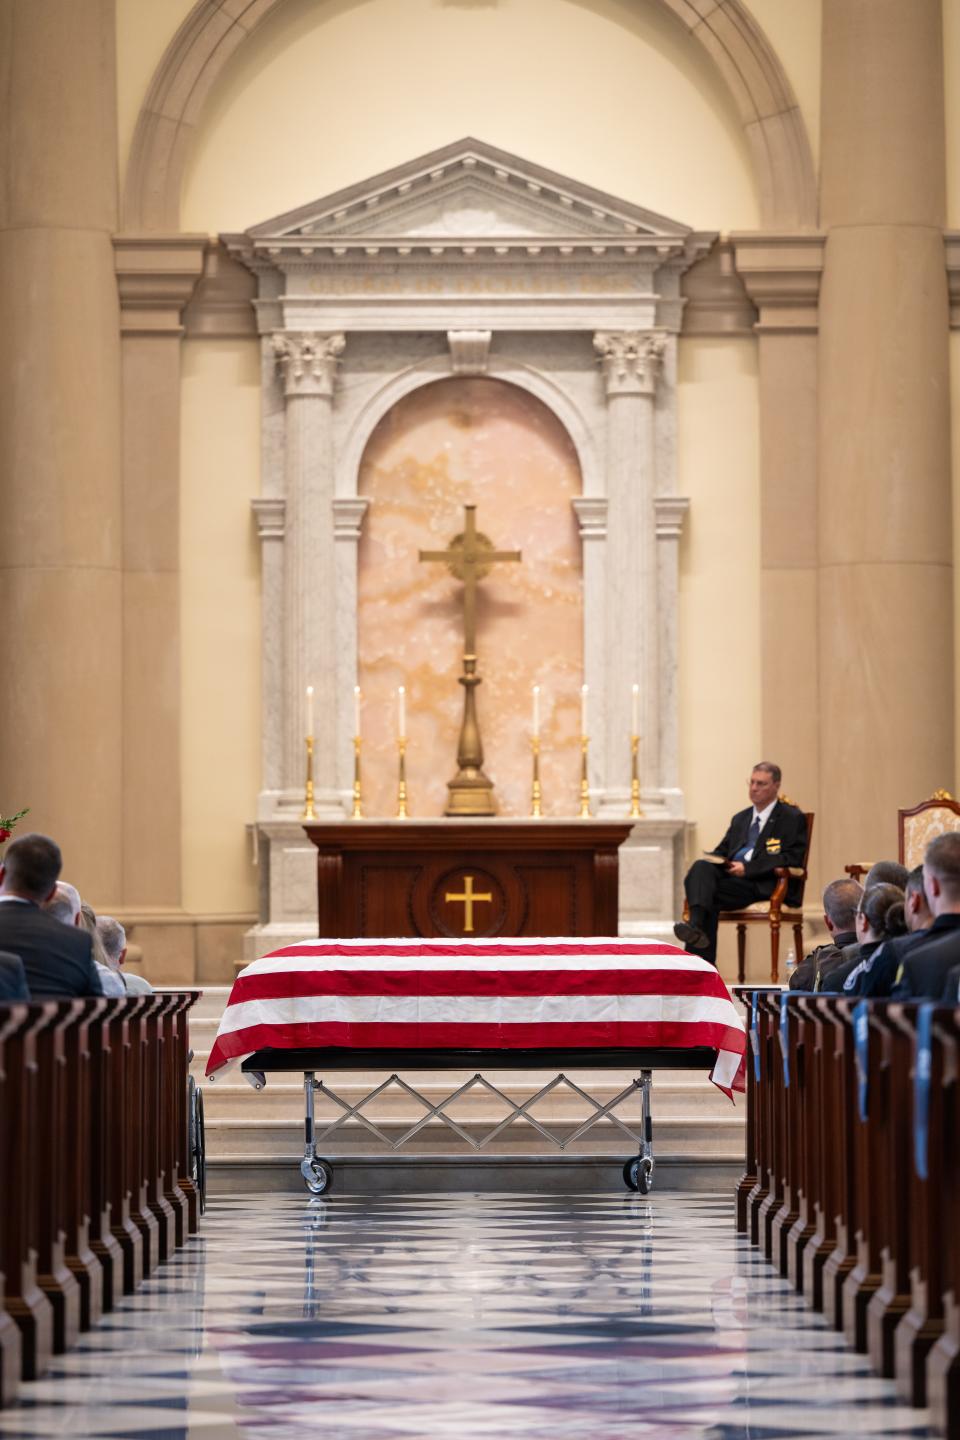 The flag-draped casket of Hillsdale County Deputy William Butler Jr. is pictured during his funeral Wednesday at Christ Chapel at Hillsdale College.